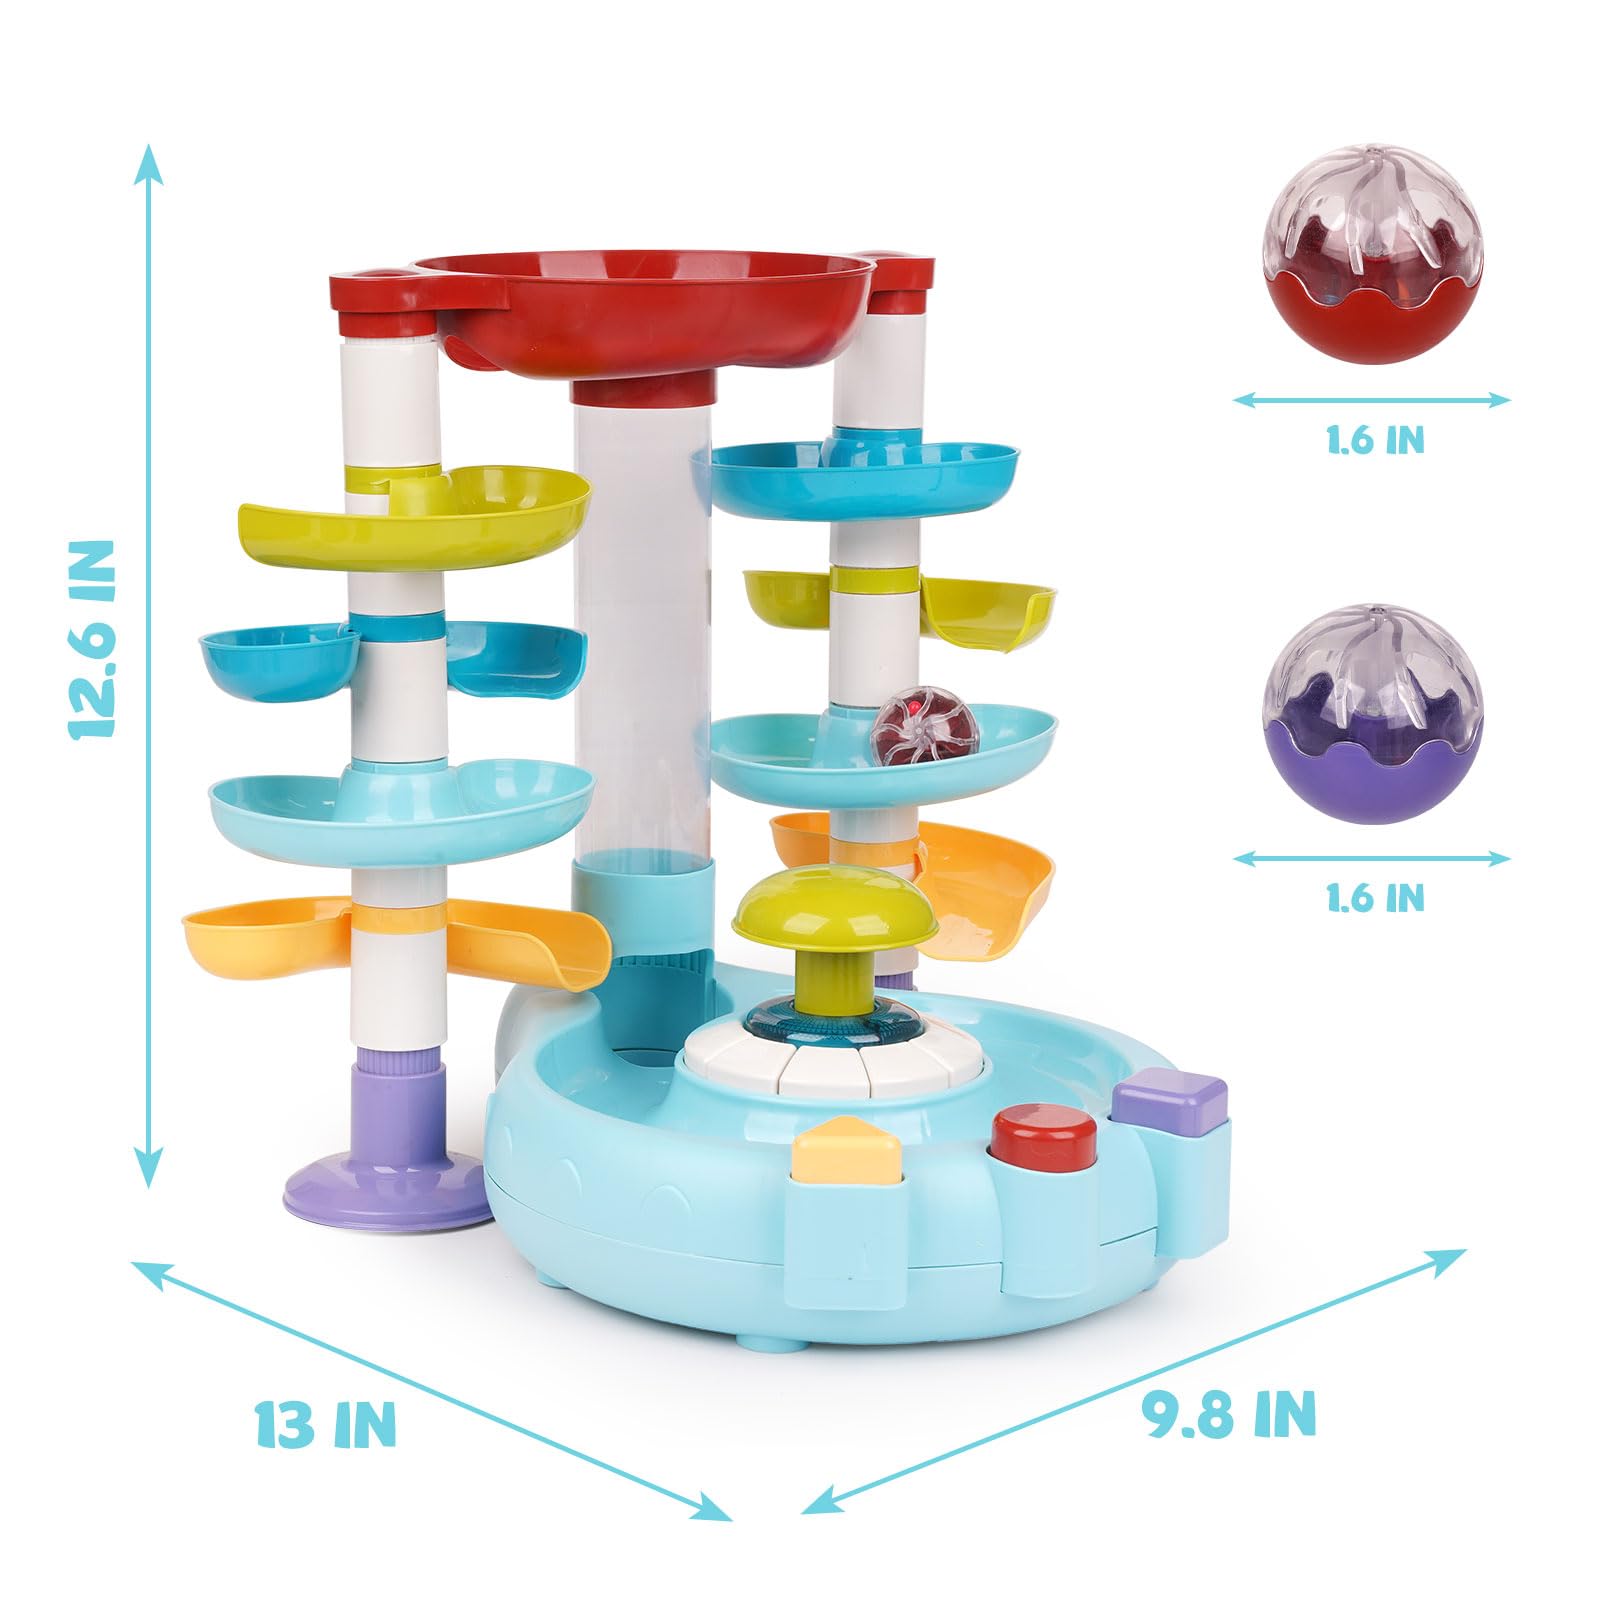 4 Layer Ball Drop Toy and Roll Swirling Tower for Baby and Toddler Toy Busy Ball Popper Toy Ball Activity Toy with Music Lighting,Ball Run Ramp for Baby Learning Preschool Educational Toy